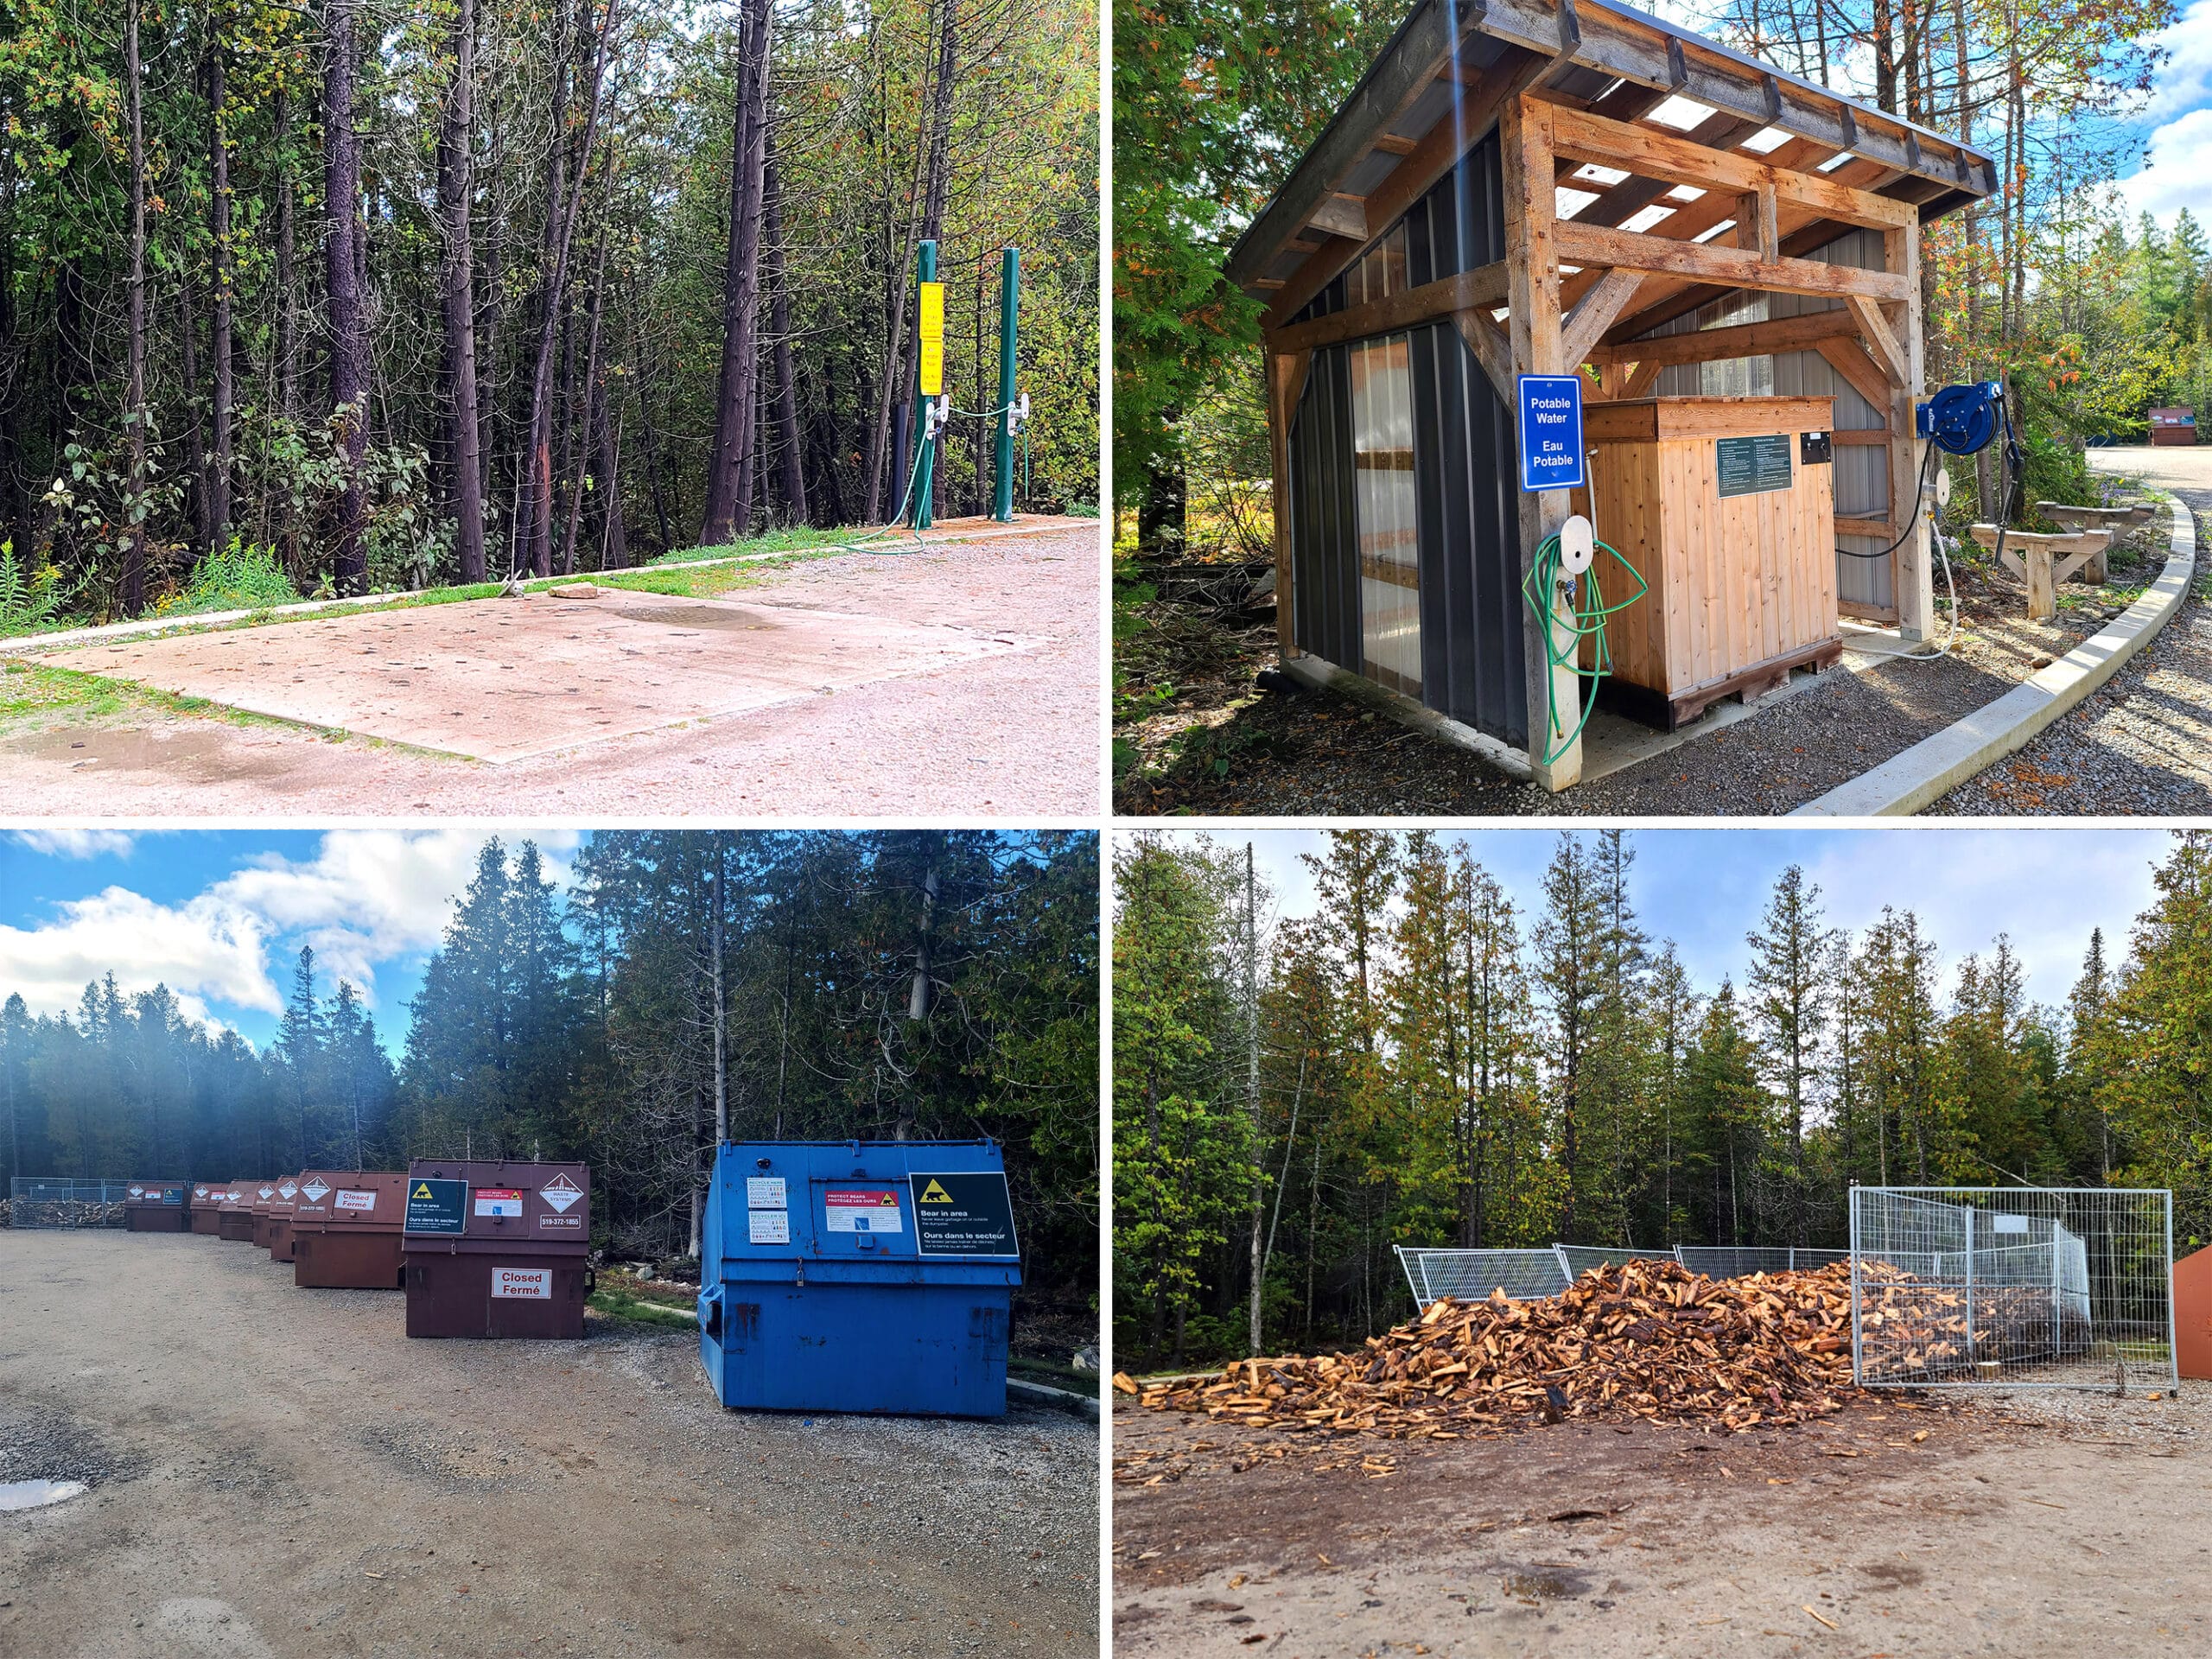 4 part image showing the dump and fill station, along with the wood pile and garbage bins.